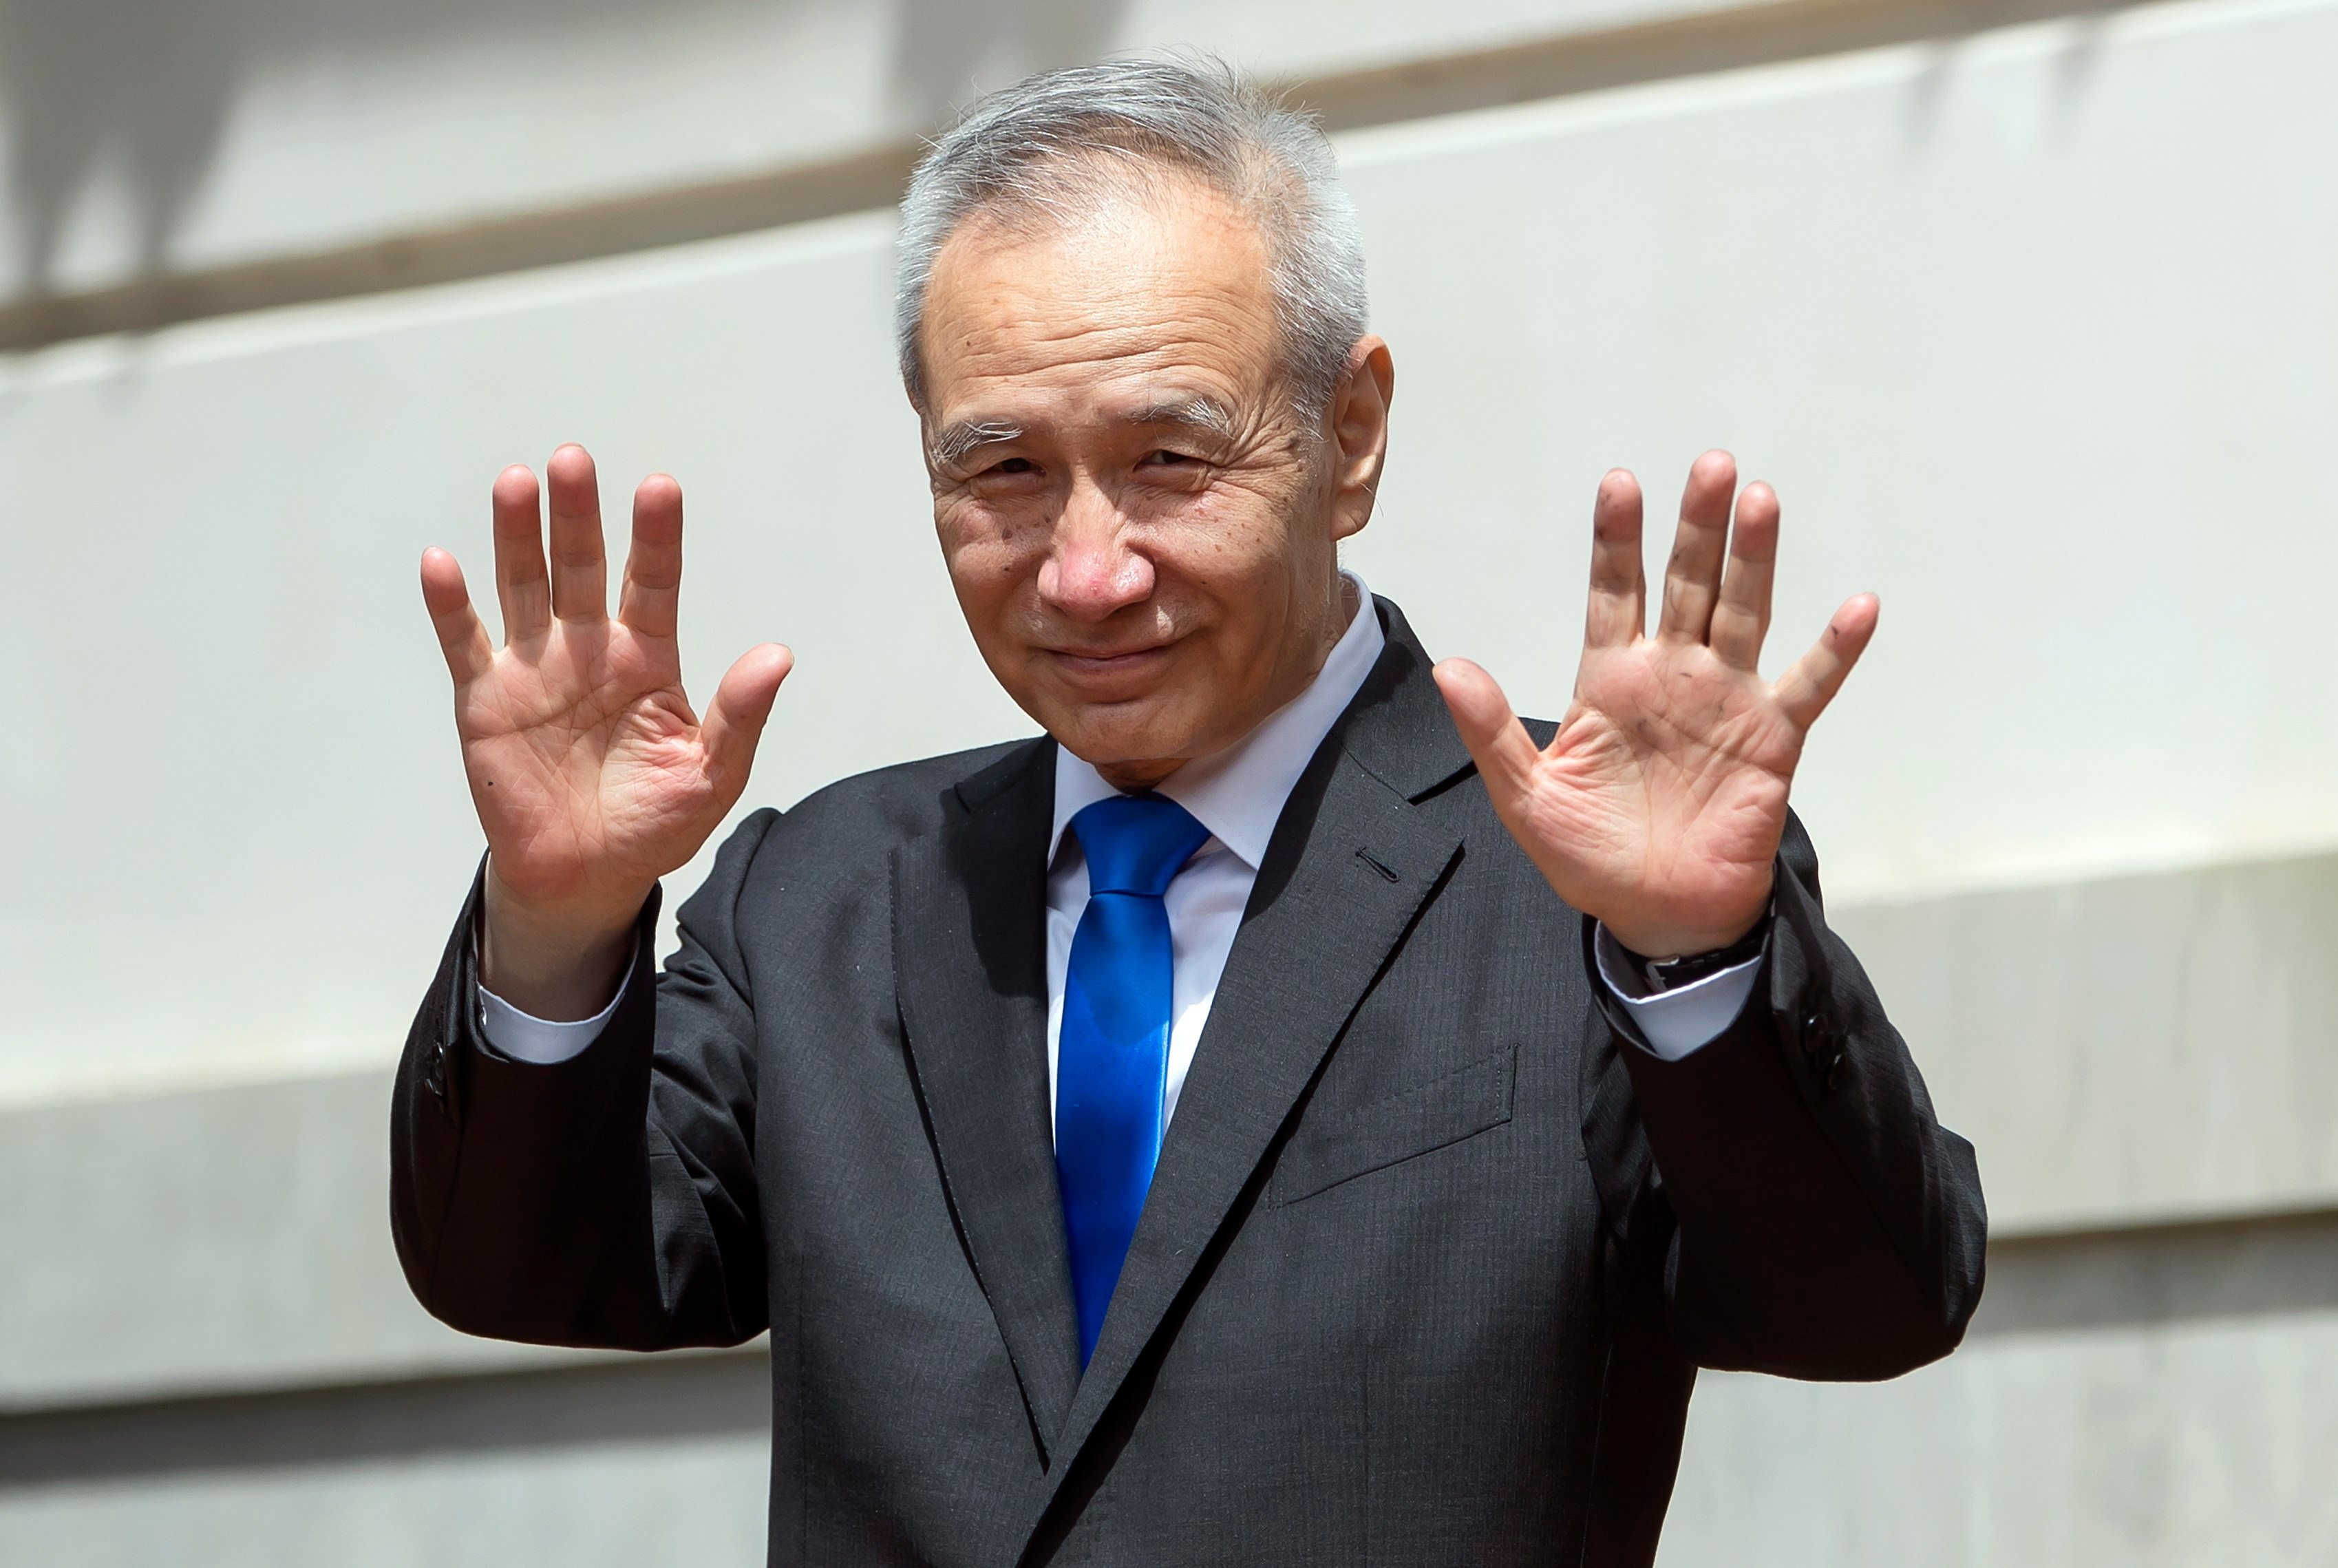 Sources say former vice-premier Liu He continues to influence China’s economic decisions. Photo: EPA-EFE